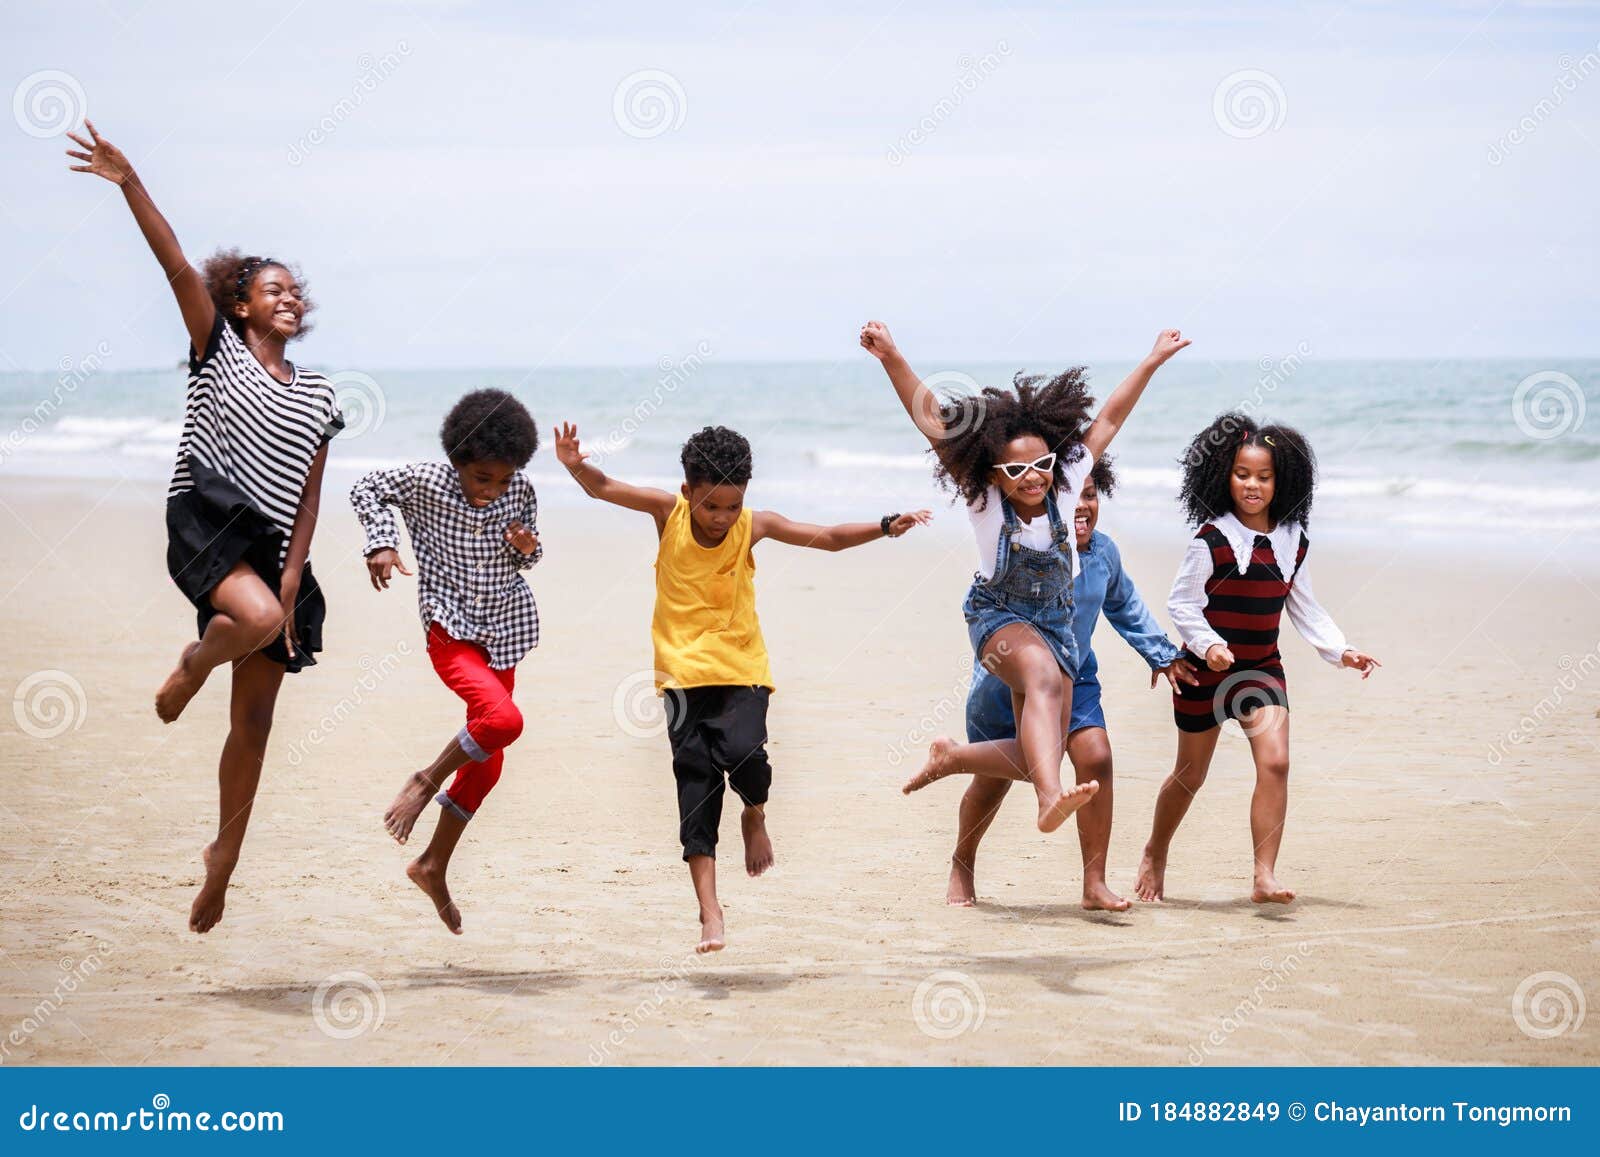 Funny Vacation. Children or Kids Playing and Romp Together at the Beach on  Holiday Stock Image - Image of enjoyment, covid19: 184882849